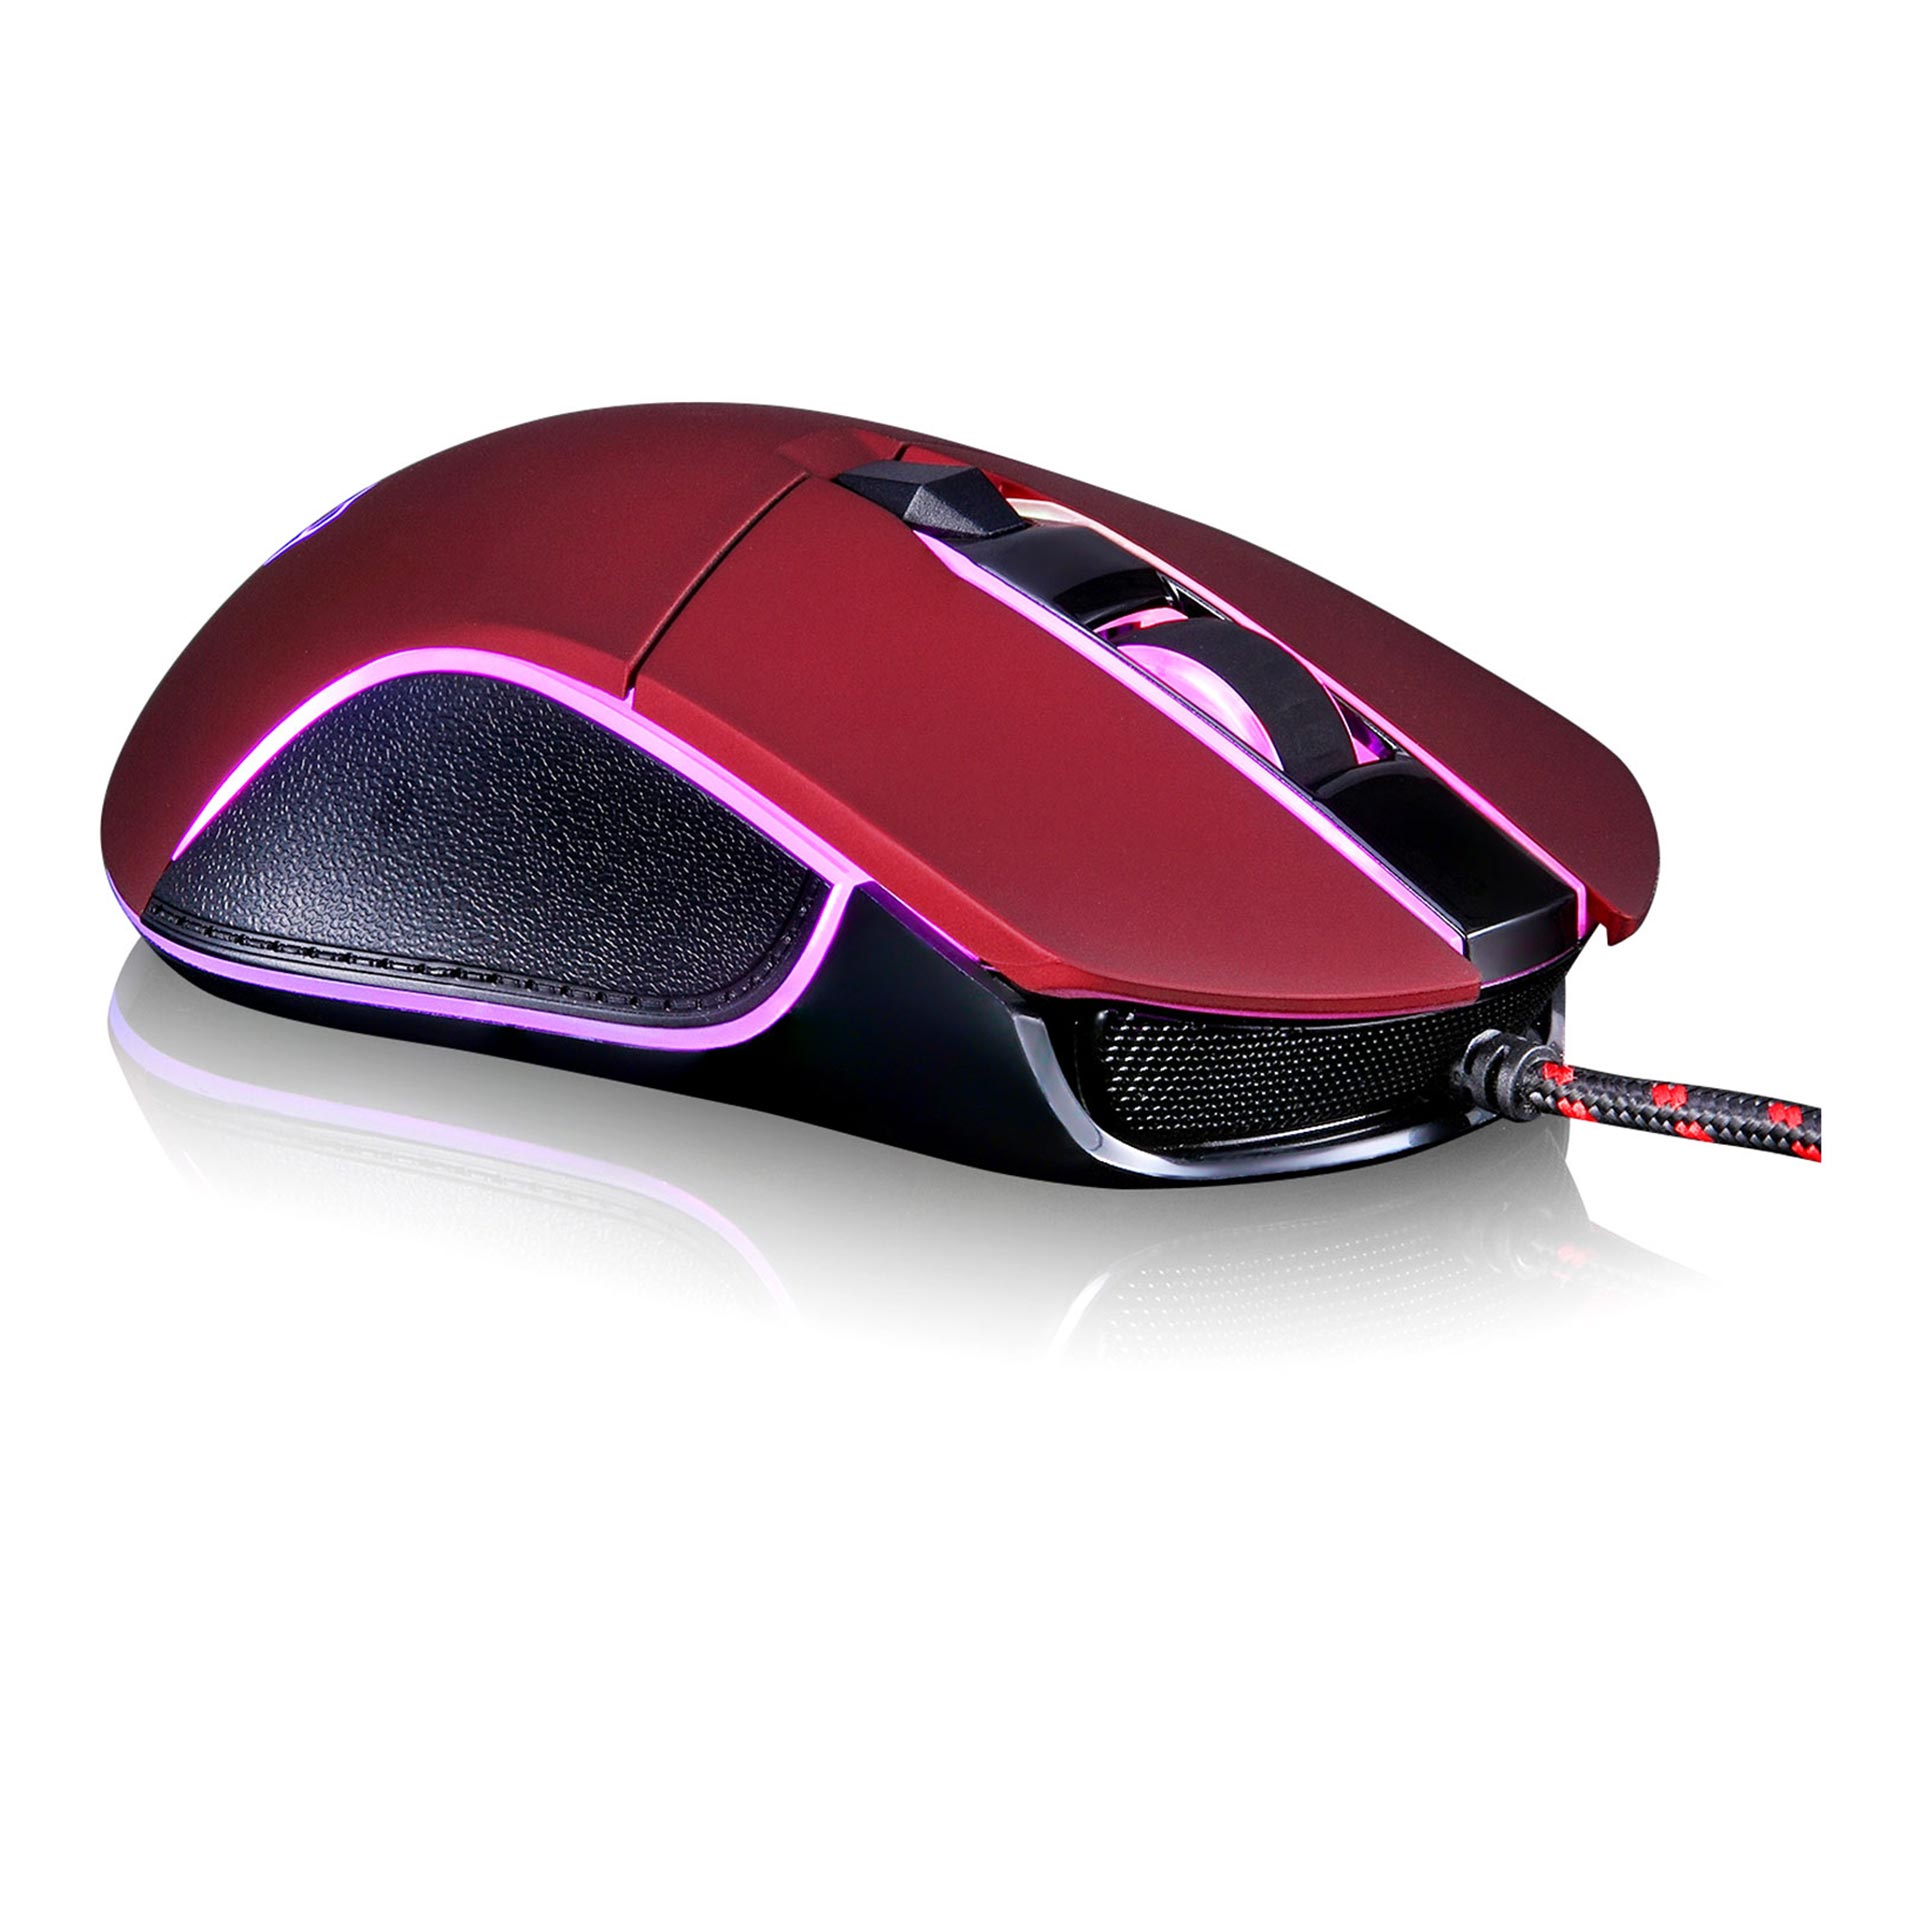 Motospeed V30 Wired Optical USB Gaming Mouse